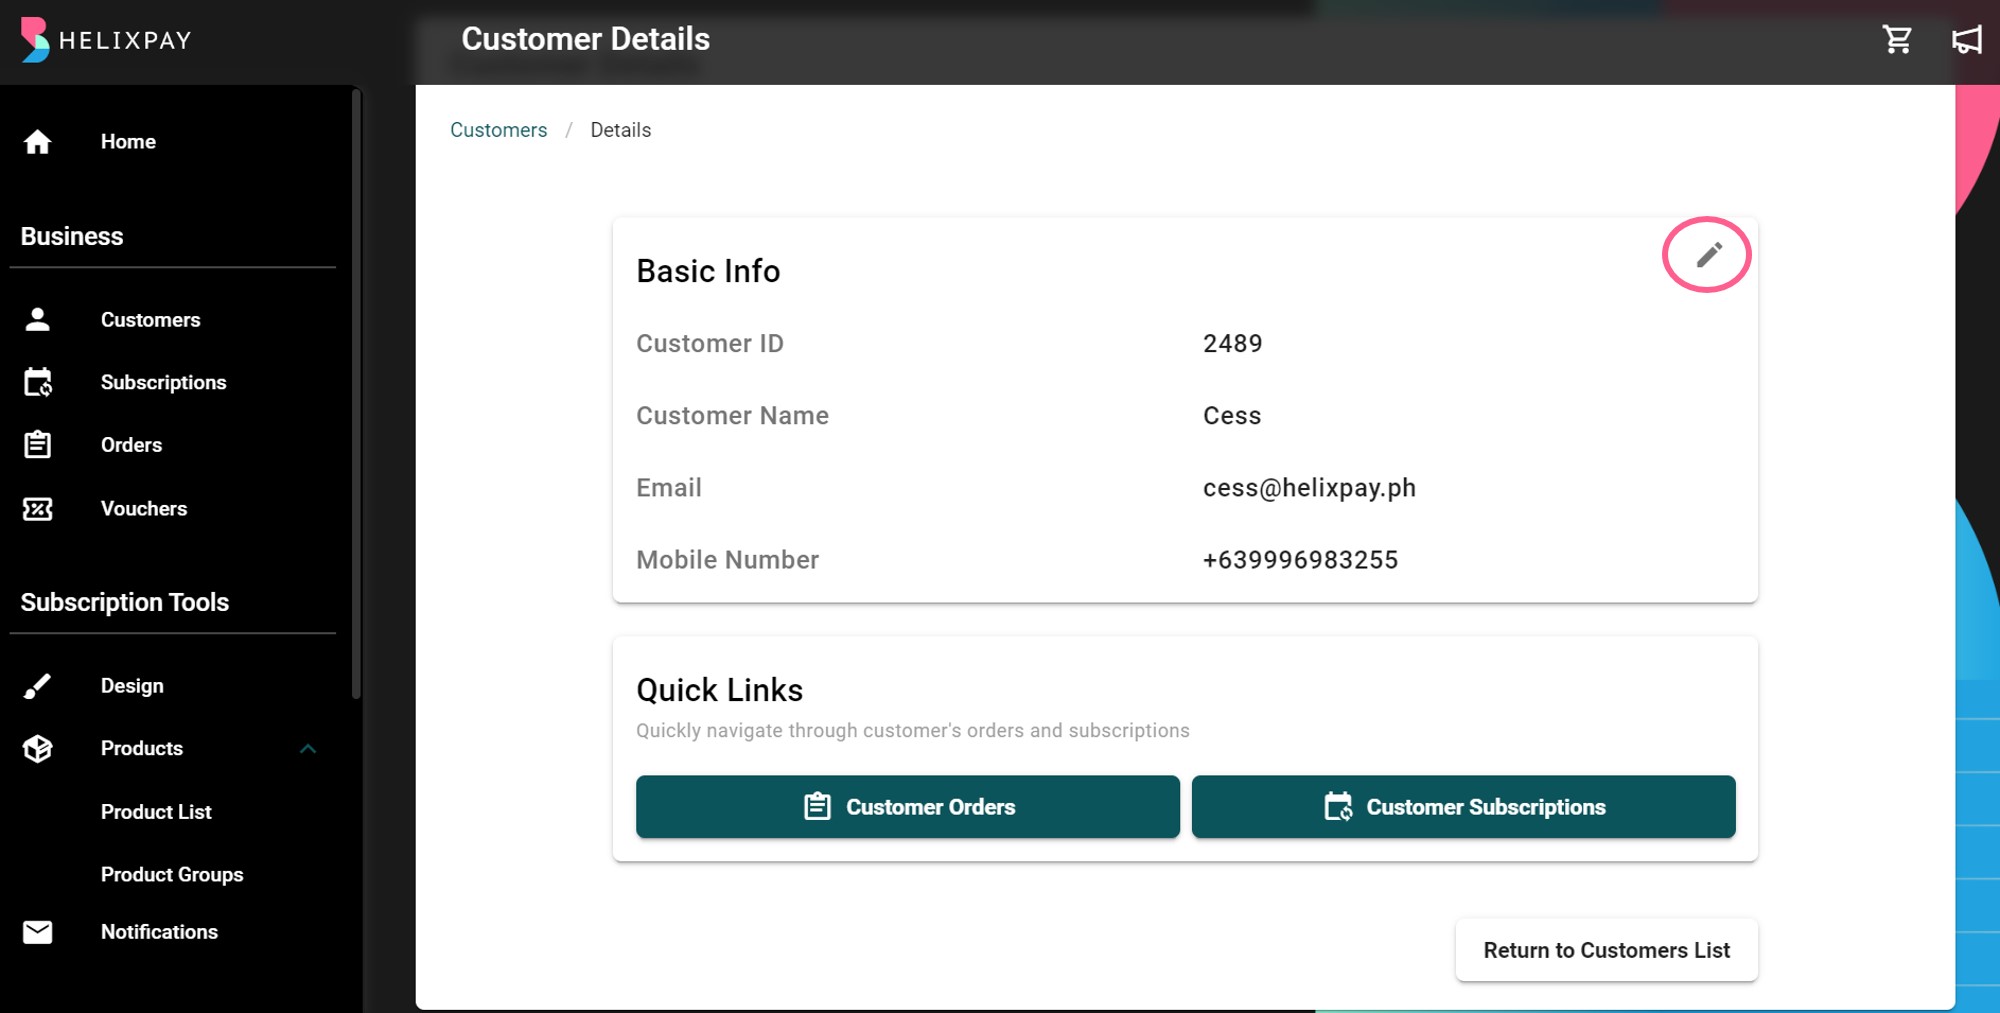 Customer’s name, email address, and phone number can be edited. You can also check easily the customer orders and subscriptions from the customer details page using the Quick Links.